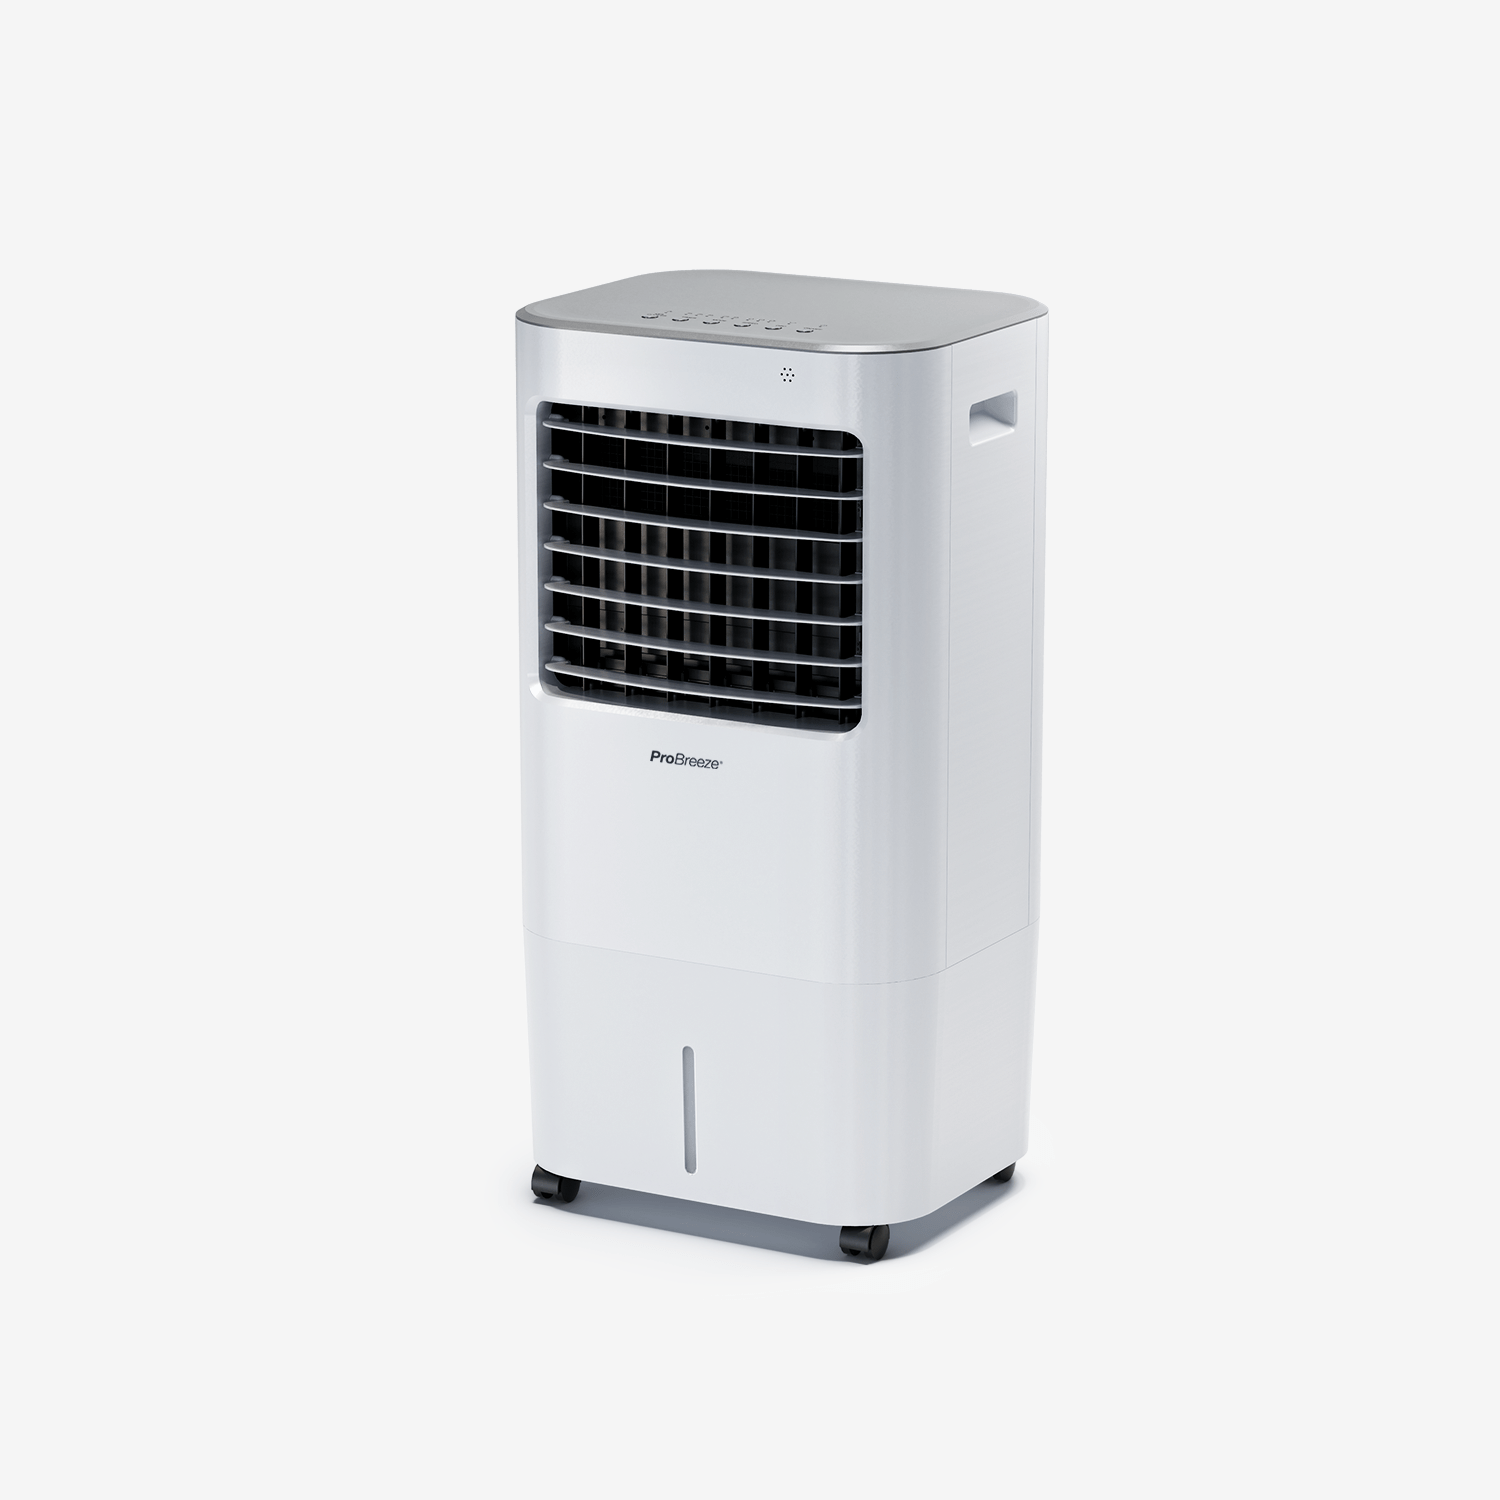 Refurbished - 10L Portable Air Cooler with 4 Operational Modes, 3 Fan Speeds, LED Display & Remote Control